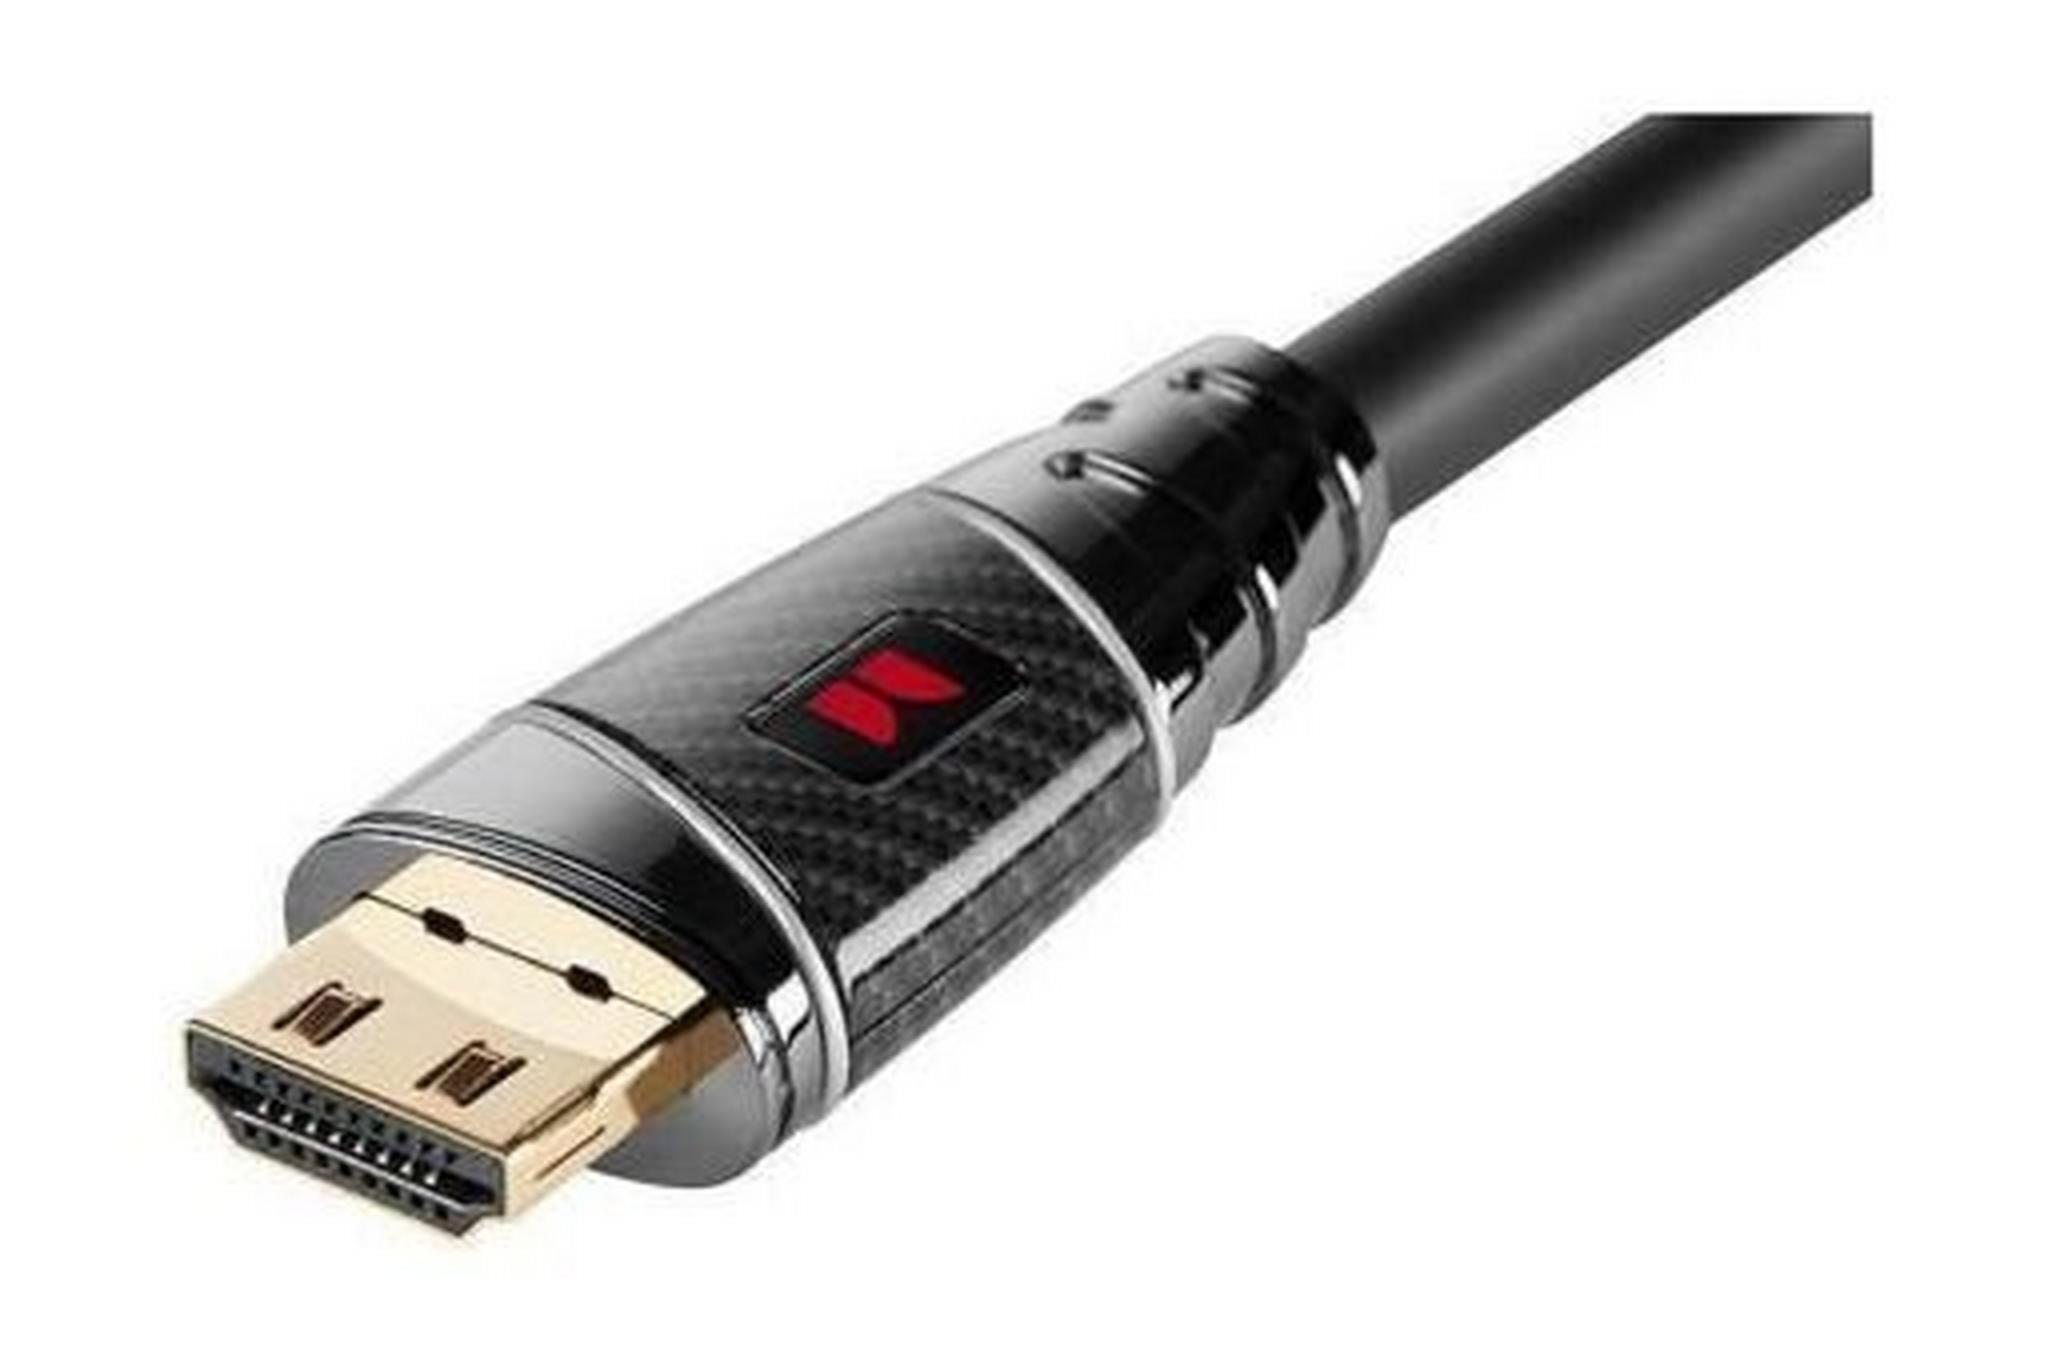 Monster Cable Ultra HD Platinum Series 1.5 Meters HDMI Cable (PLAT1.5) - Black